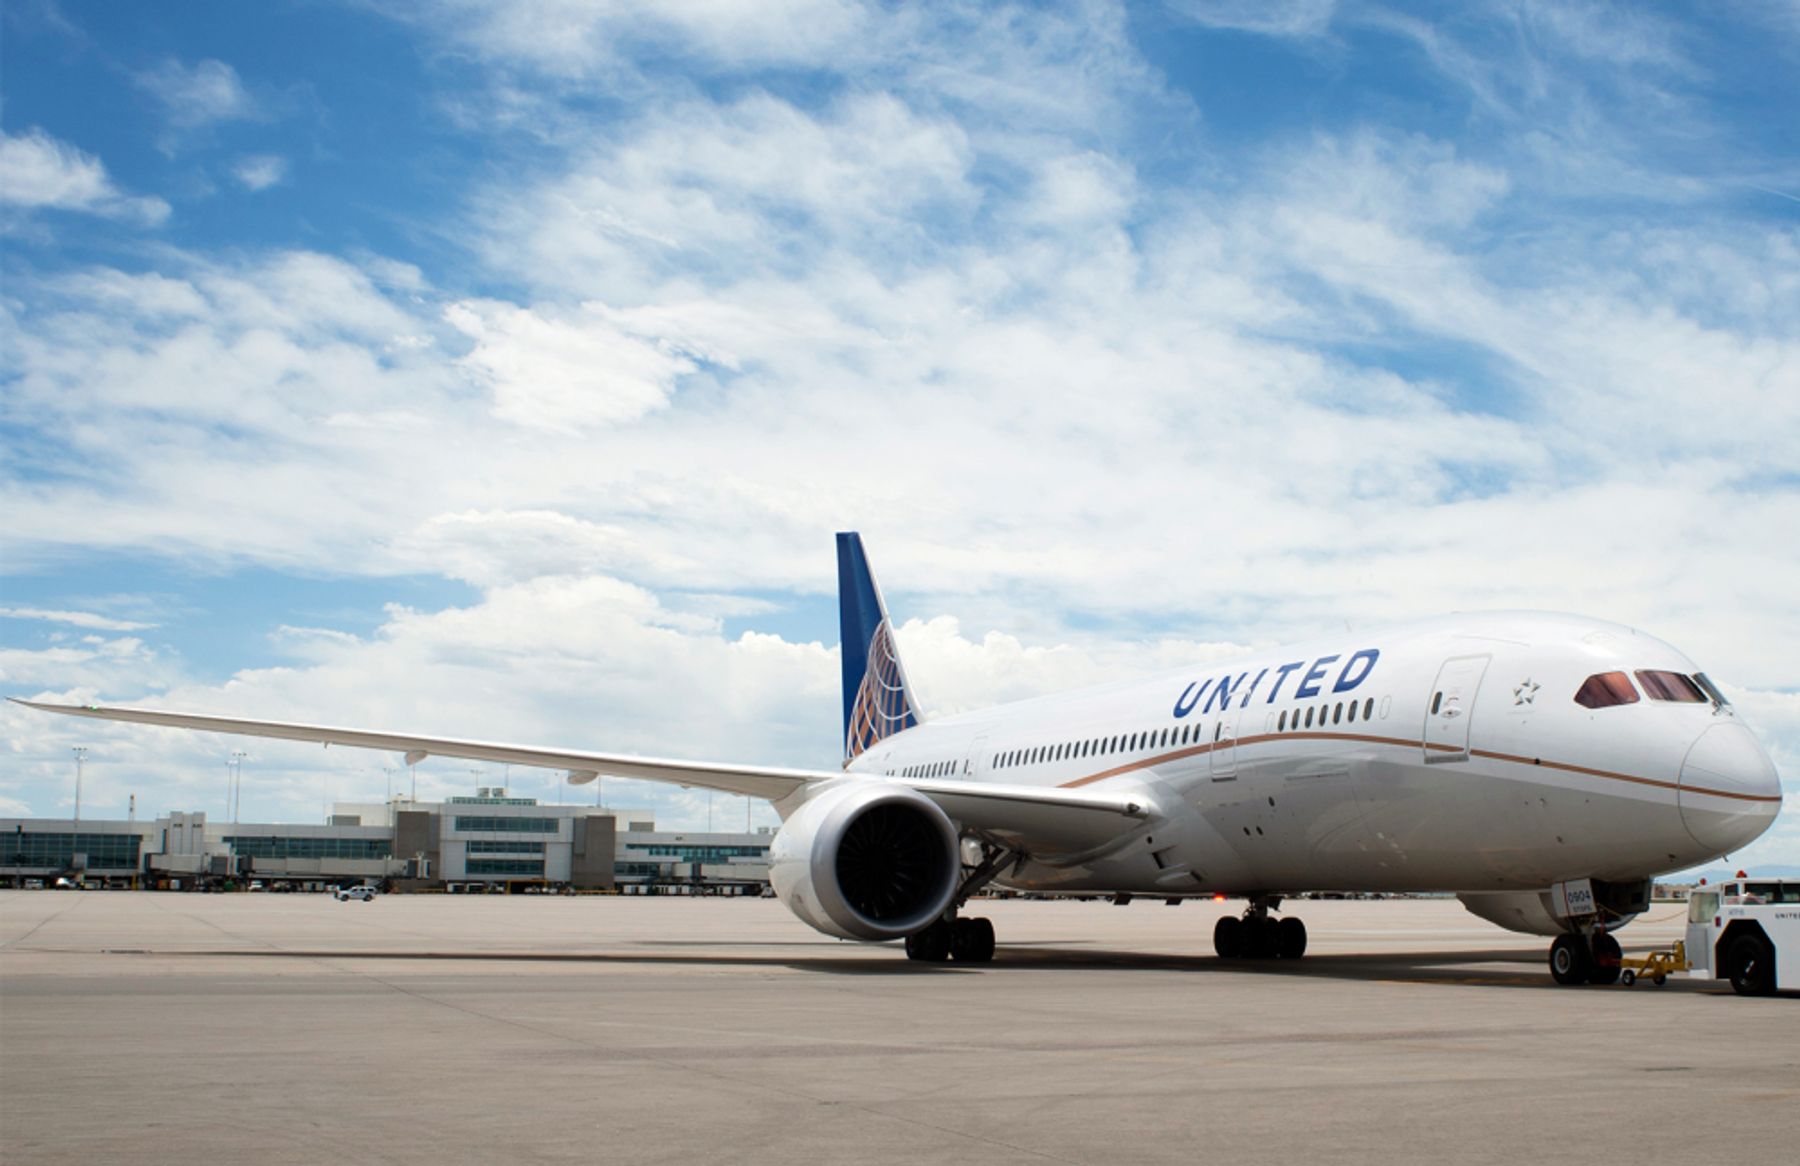 United Airlines adds Seasonal Flights to Costa Rica